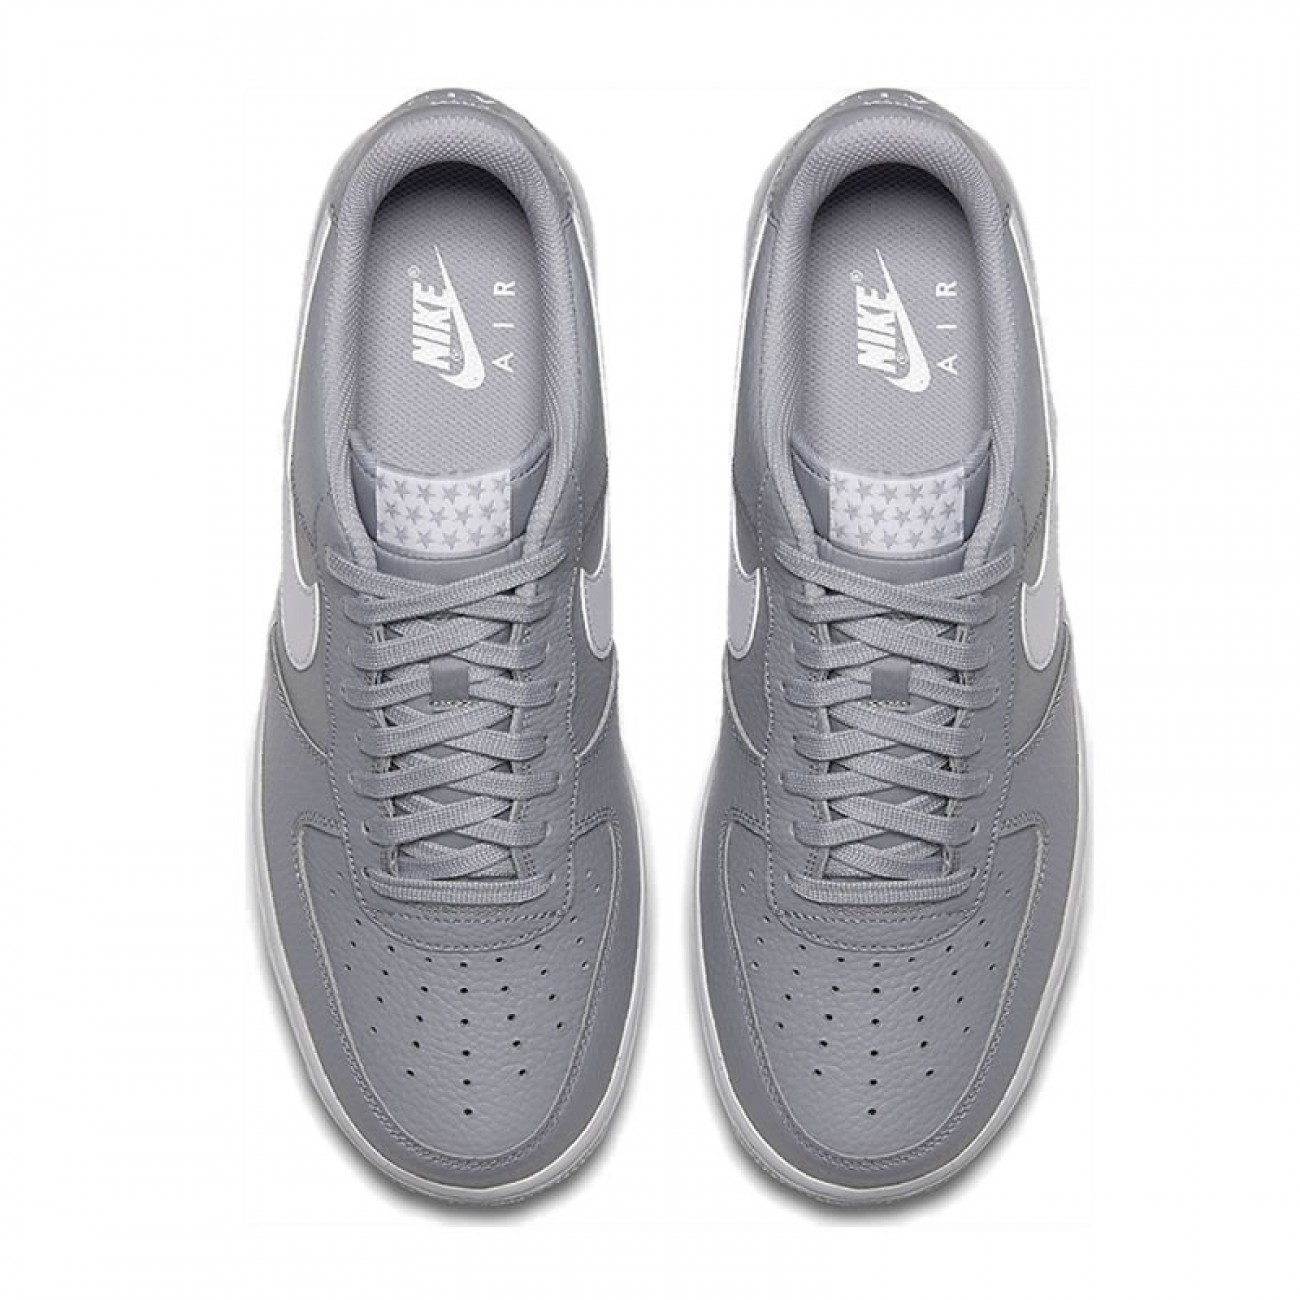 Nike Air Force 1 '07 "Stars" Wolf Grey/White Low AA4083-013